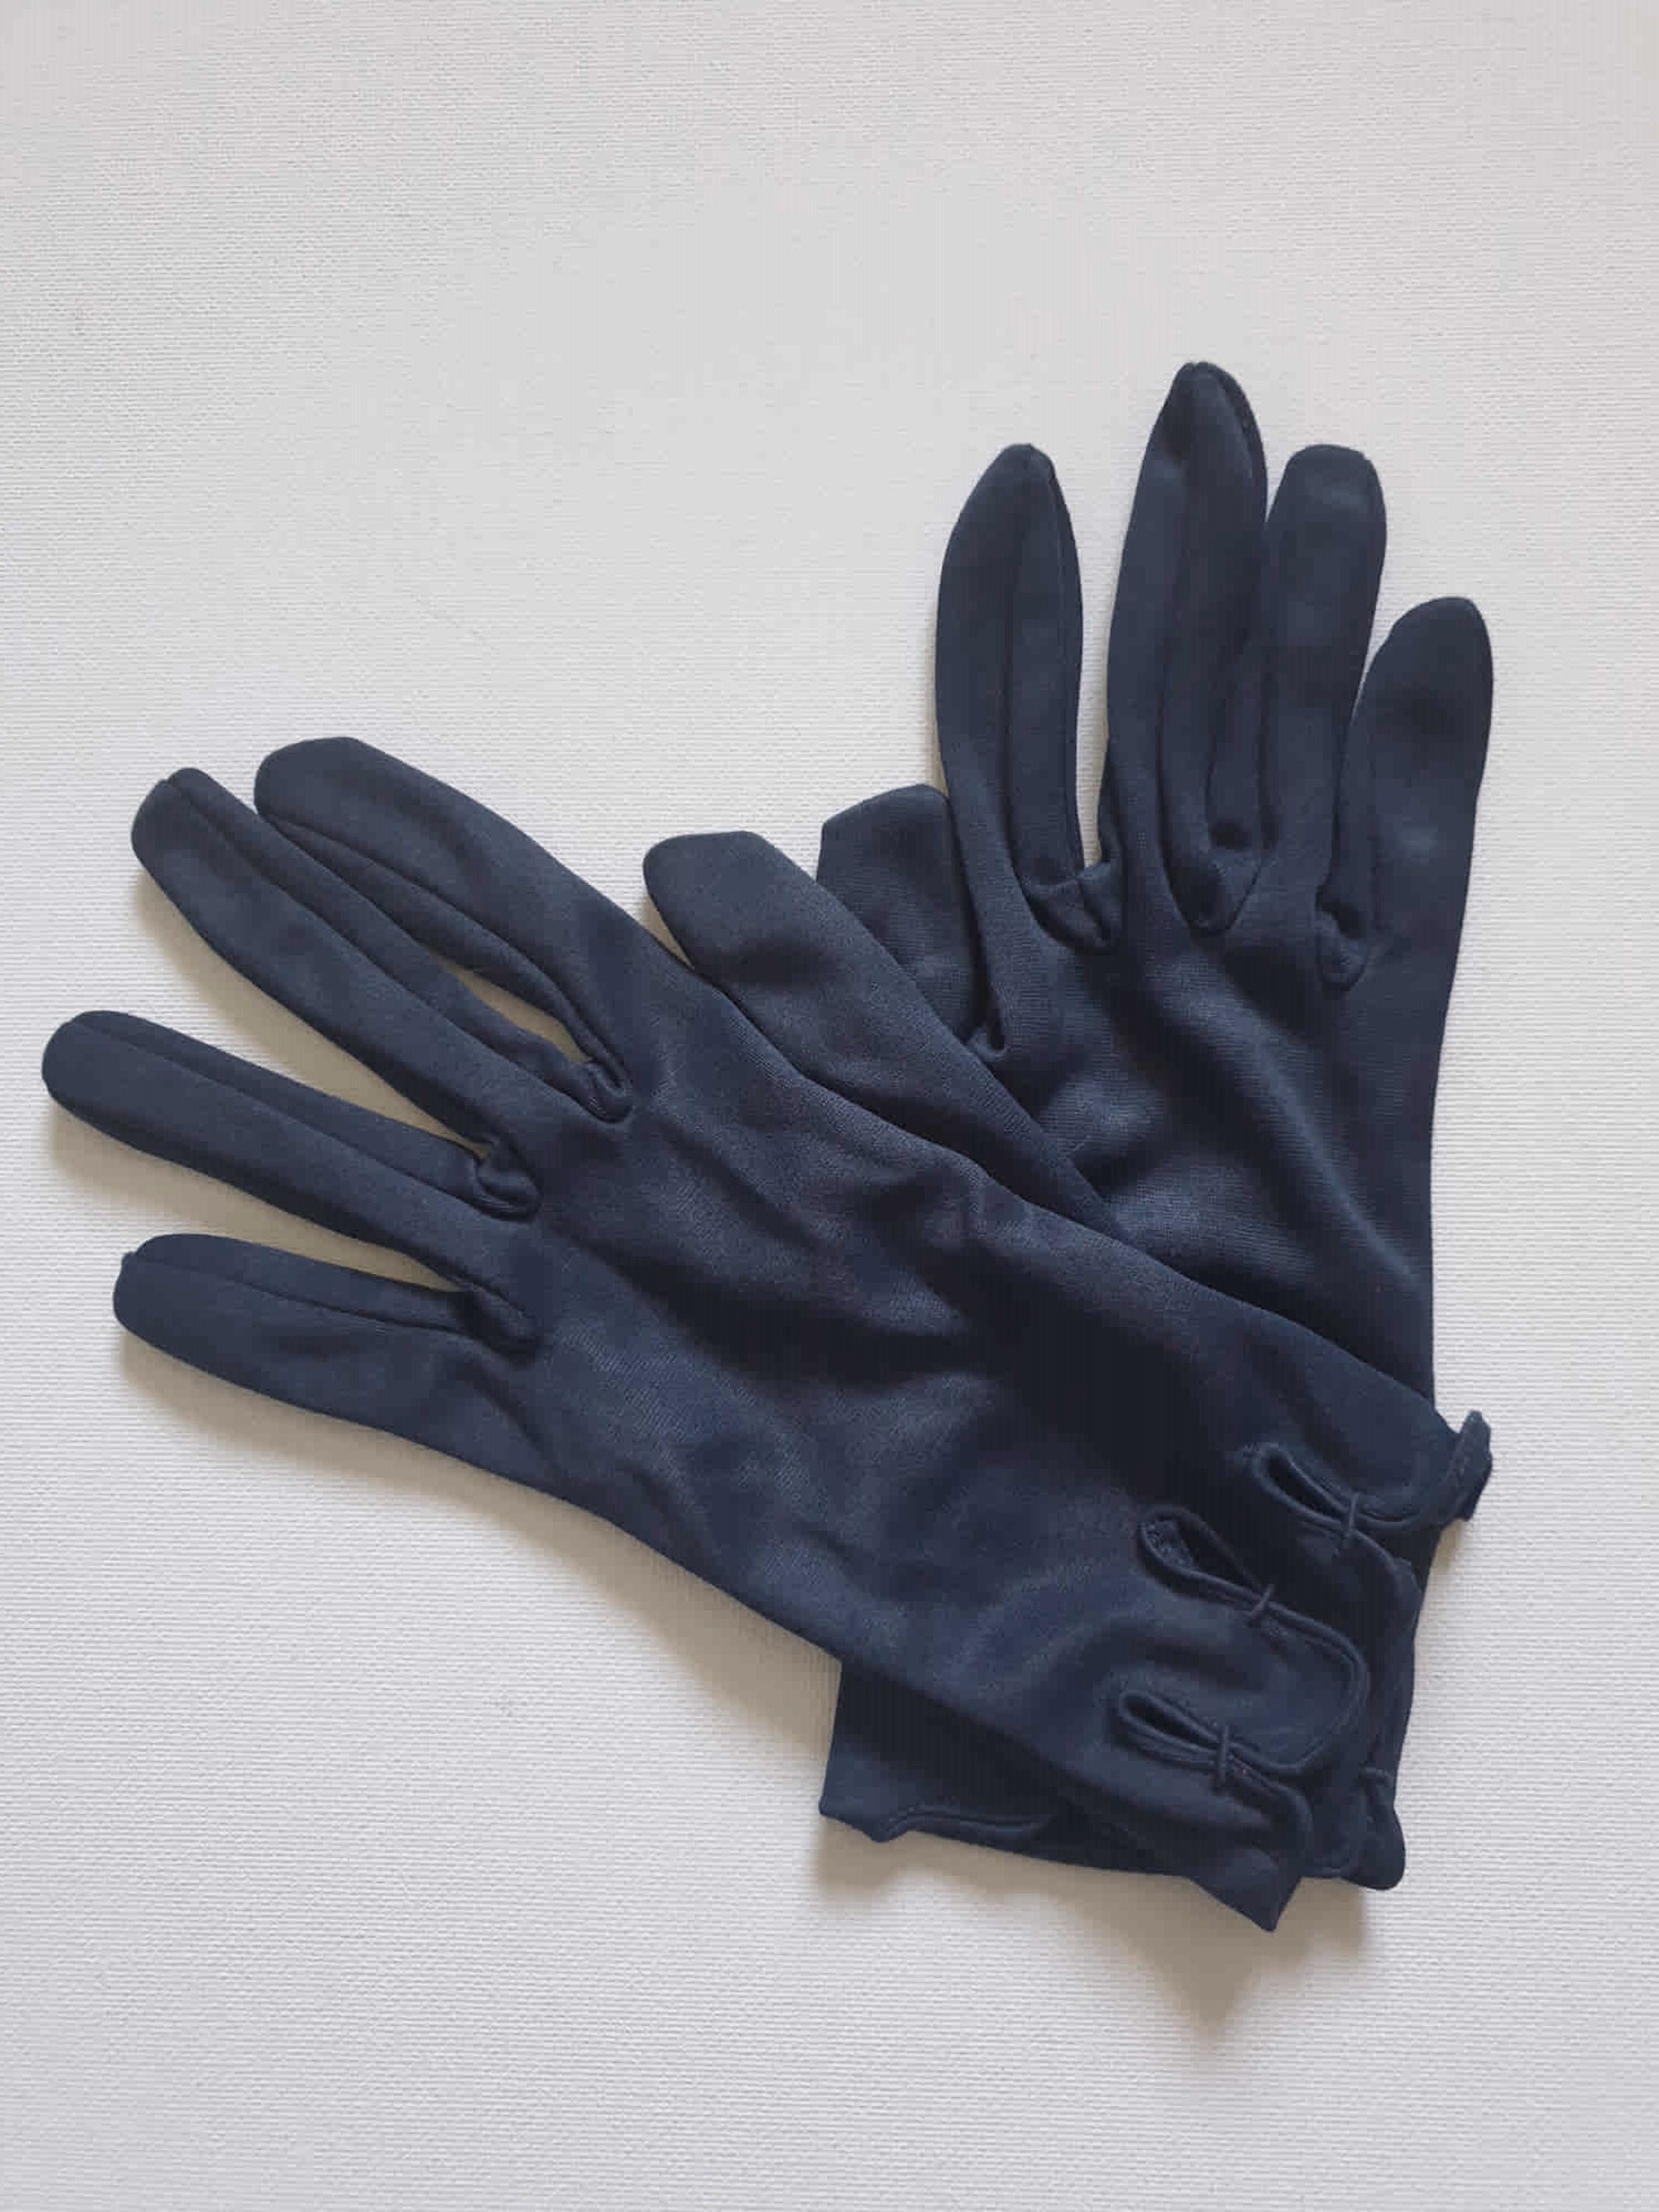 1960s vintage navy blue wrist gloves with fancy edge by kayser nylon size 6.5 small